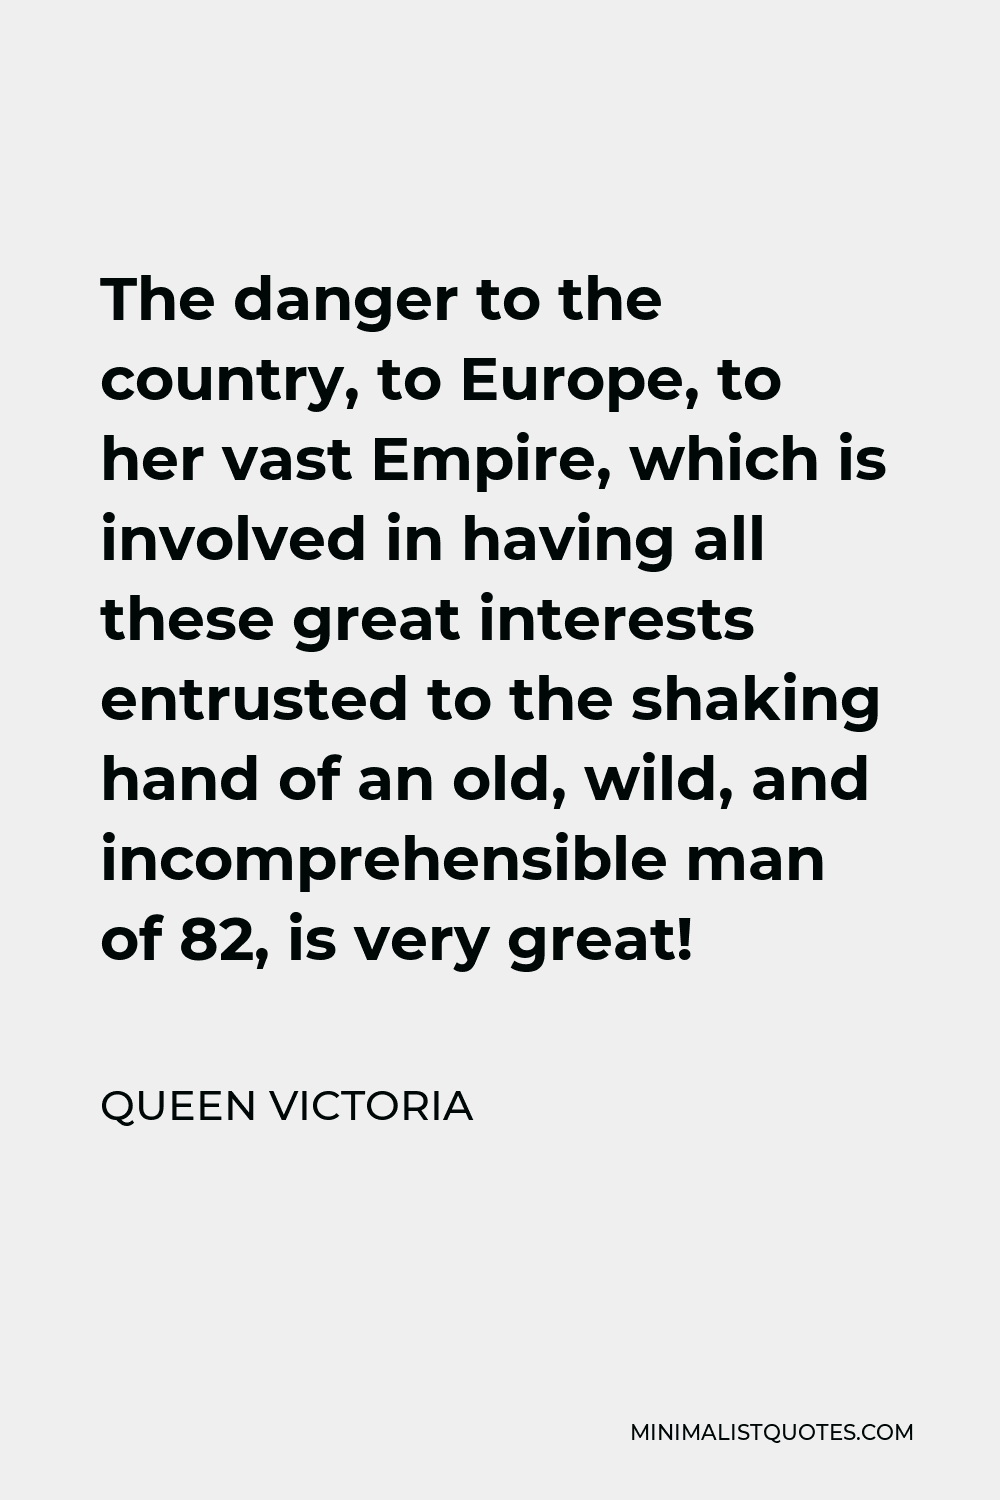 Queen Victoria Quote - The danger to the country, to Europe, to her vast Empire, which is involved in having all these great interests entrusted to the shaking hand of an old, wild, and incomprehensible man of 82, is very great!